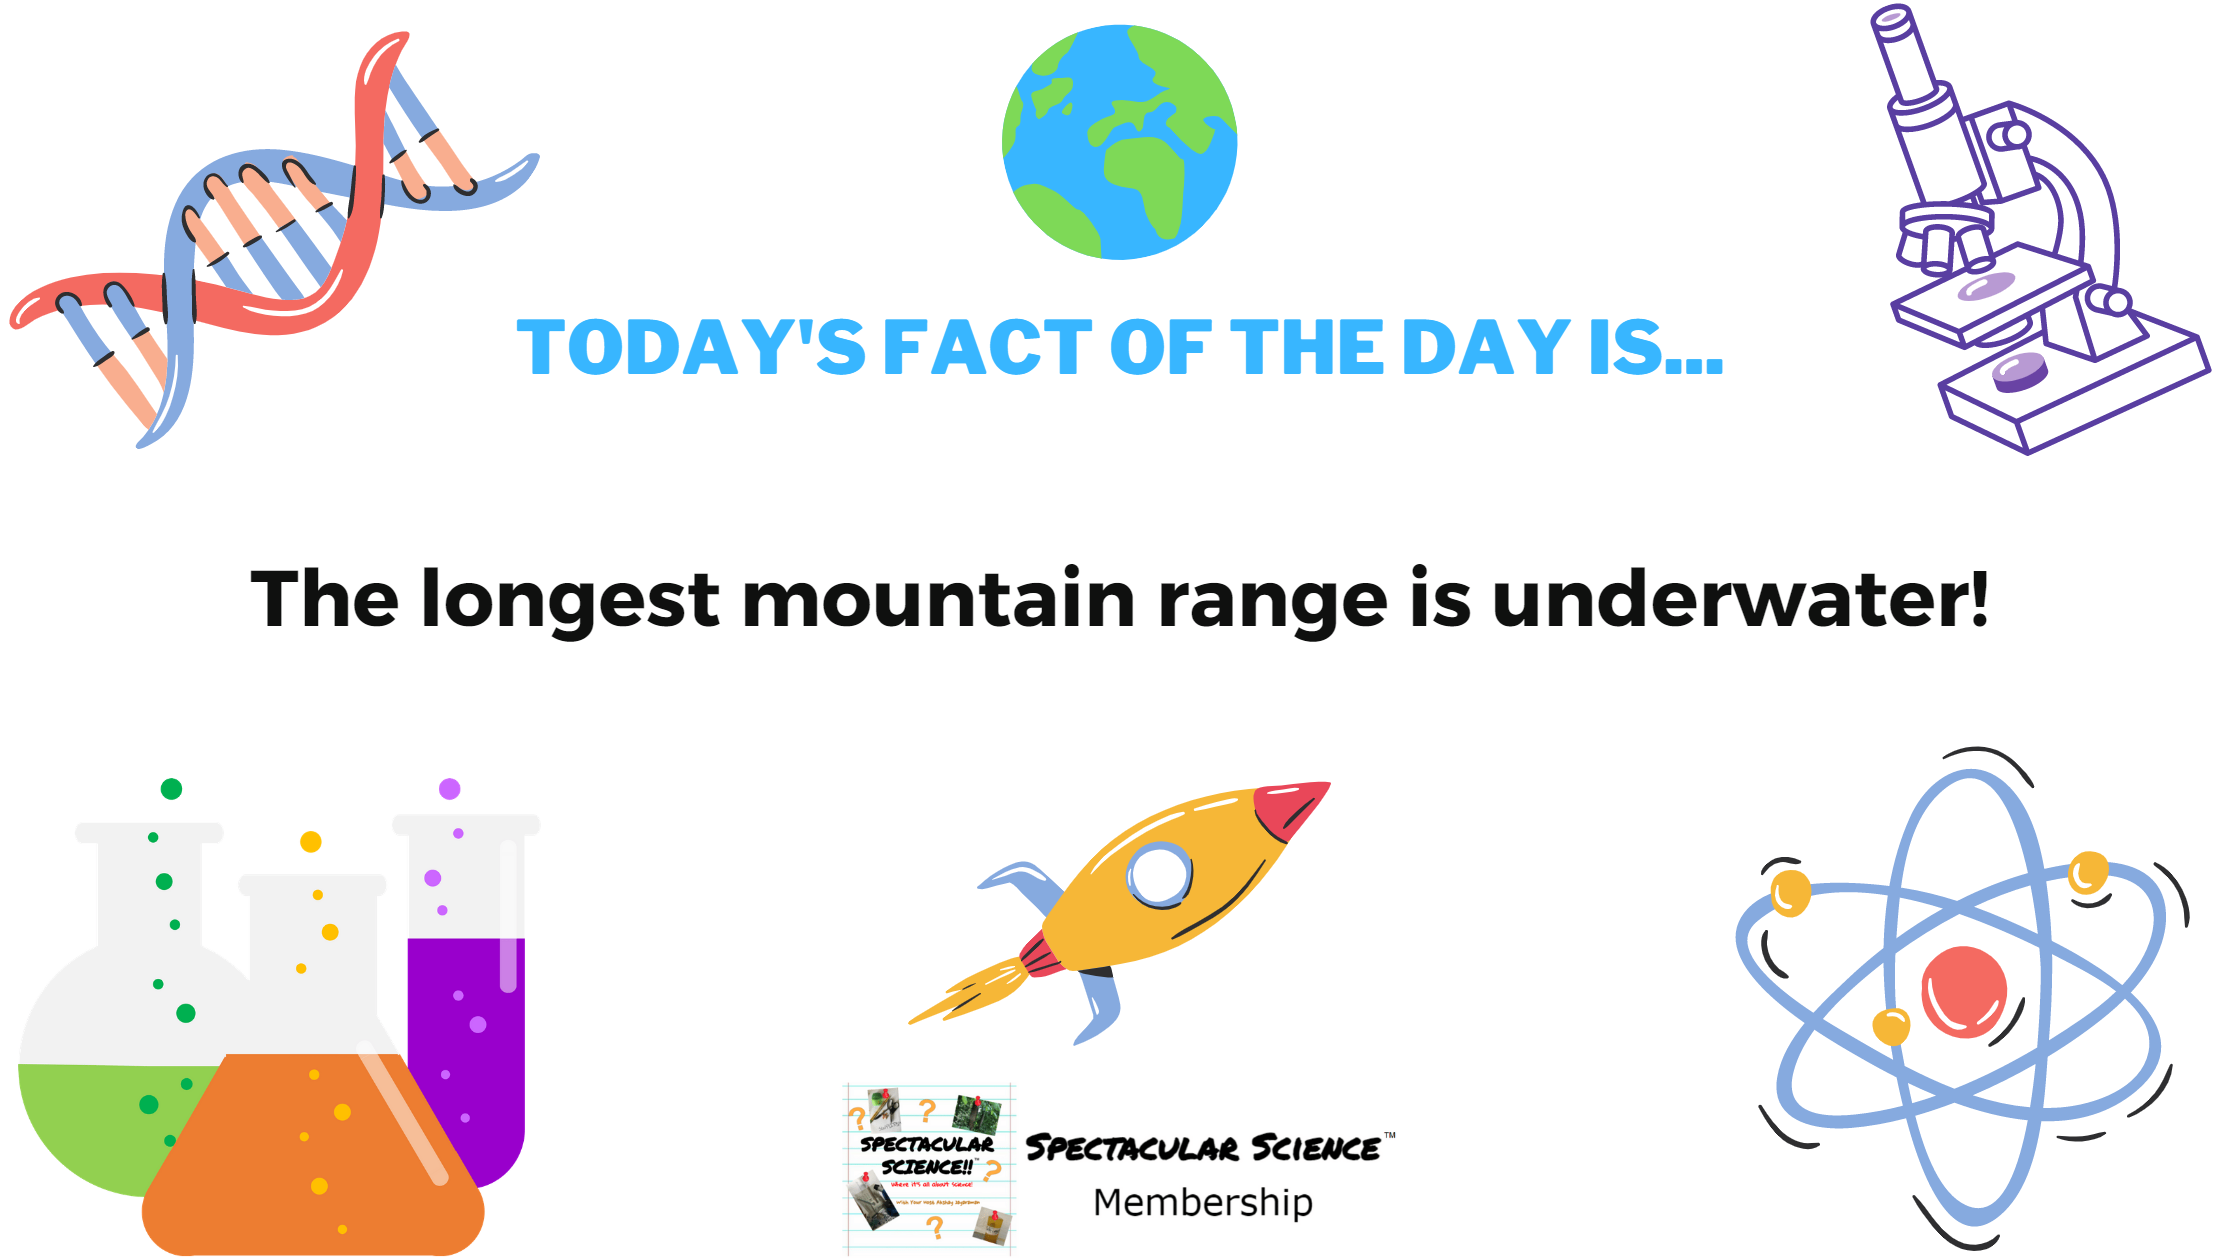 Fact of the Day Image February 21st